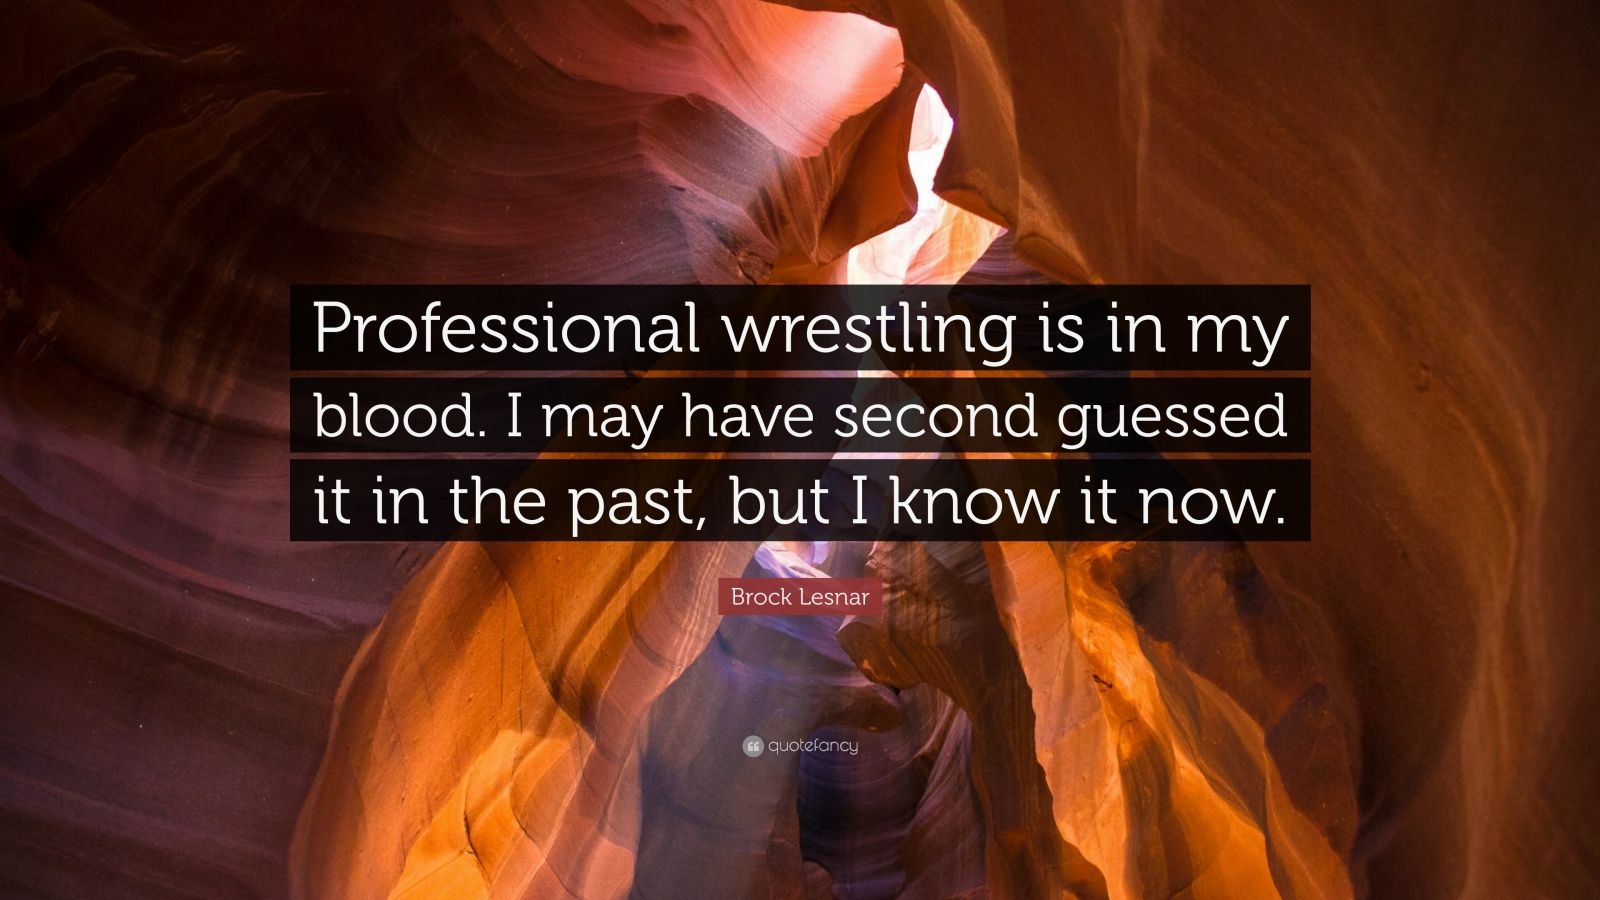 Brock Lesnar Quote: “Professional wrestling is in my blood. I may have